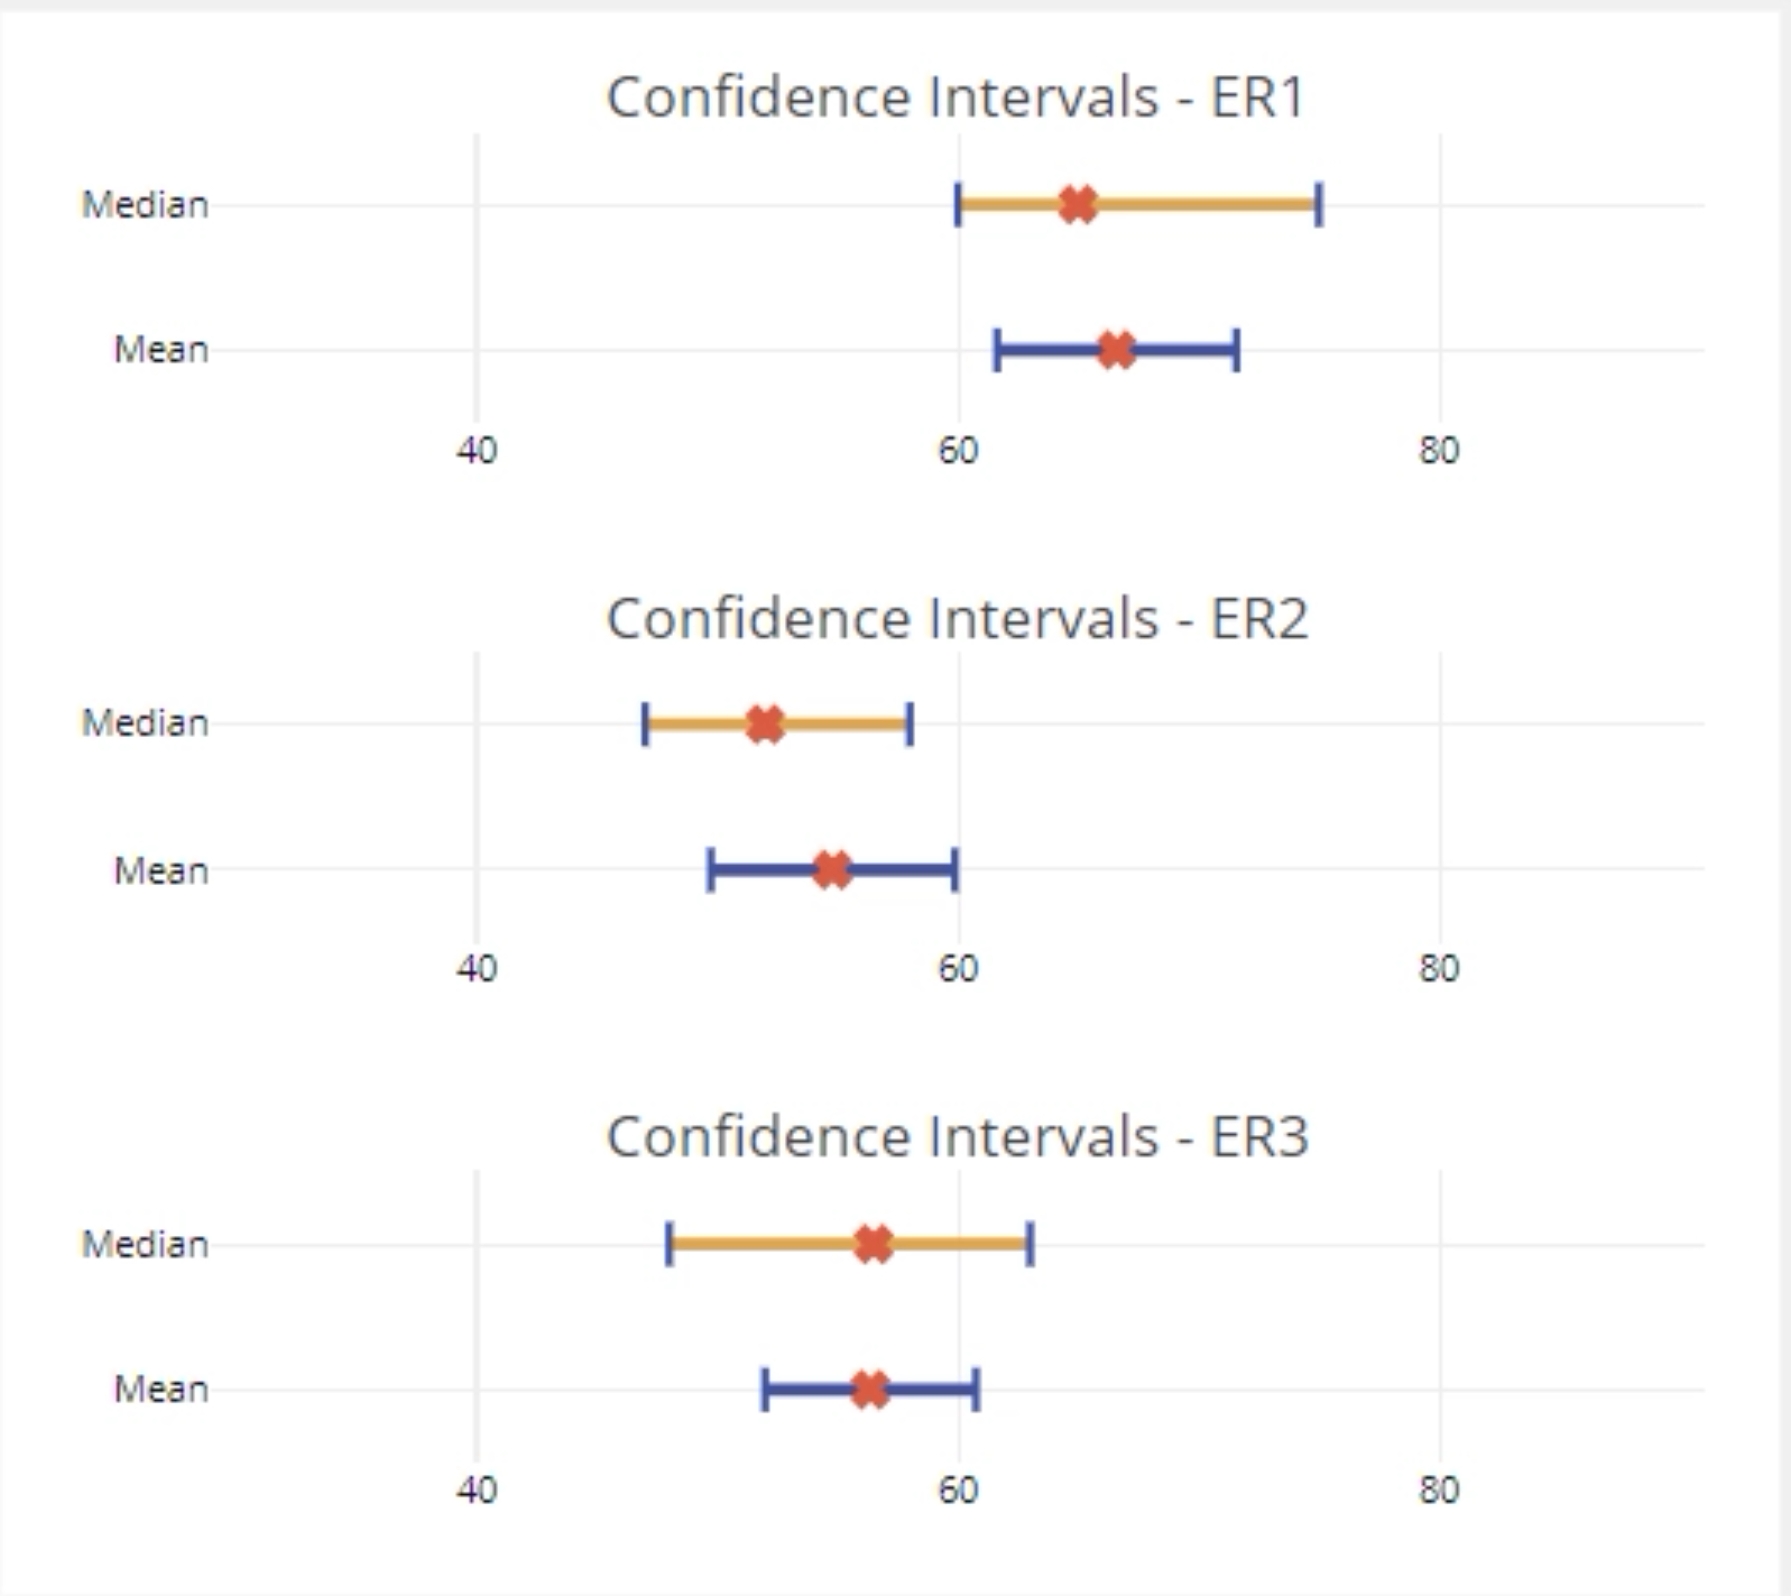 Sample confidence interval output.